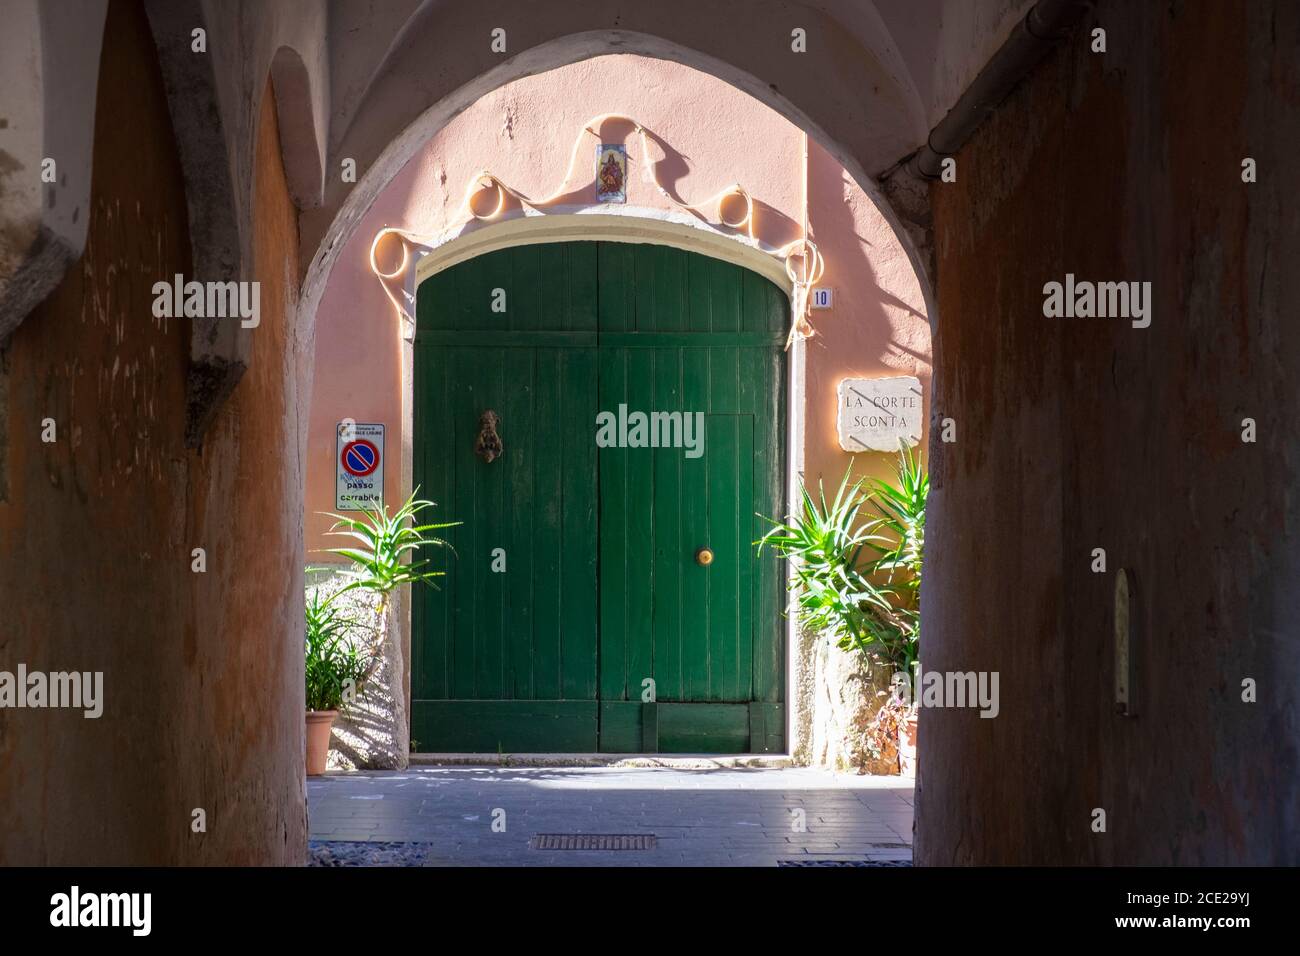 arch and green wooden old doorway in the old town of Finalborgo, Finale Ligure, Liguria, Italy Stock Photo